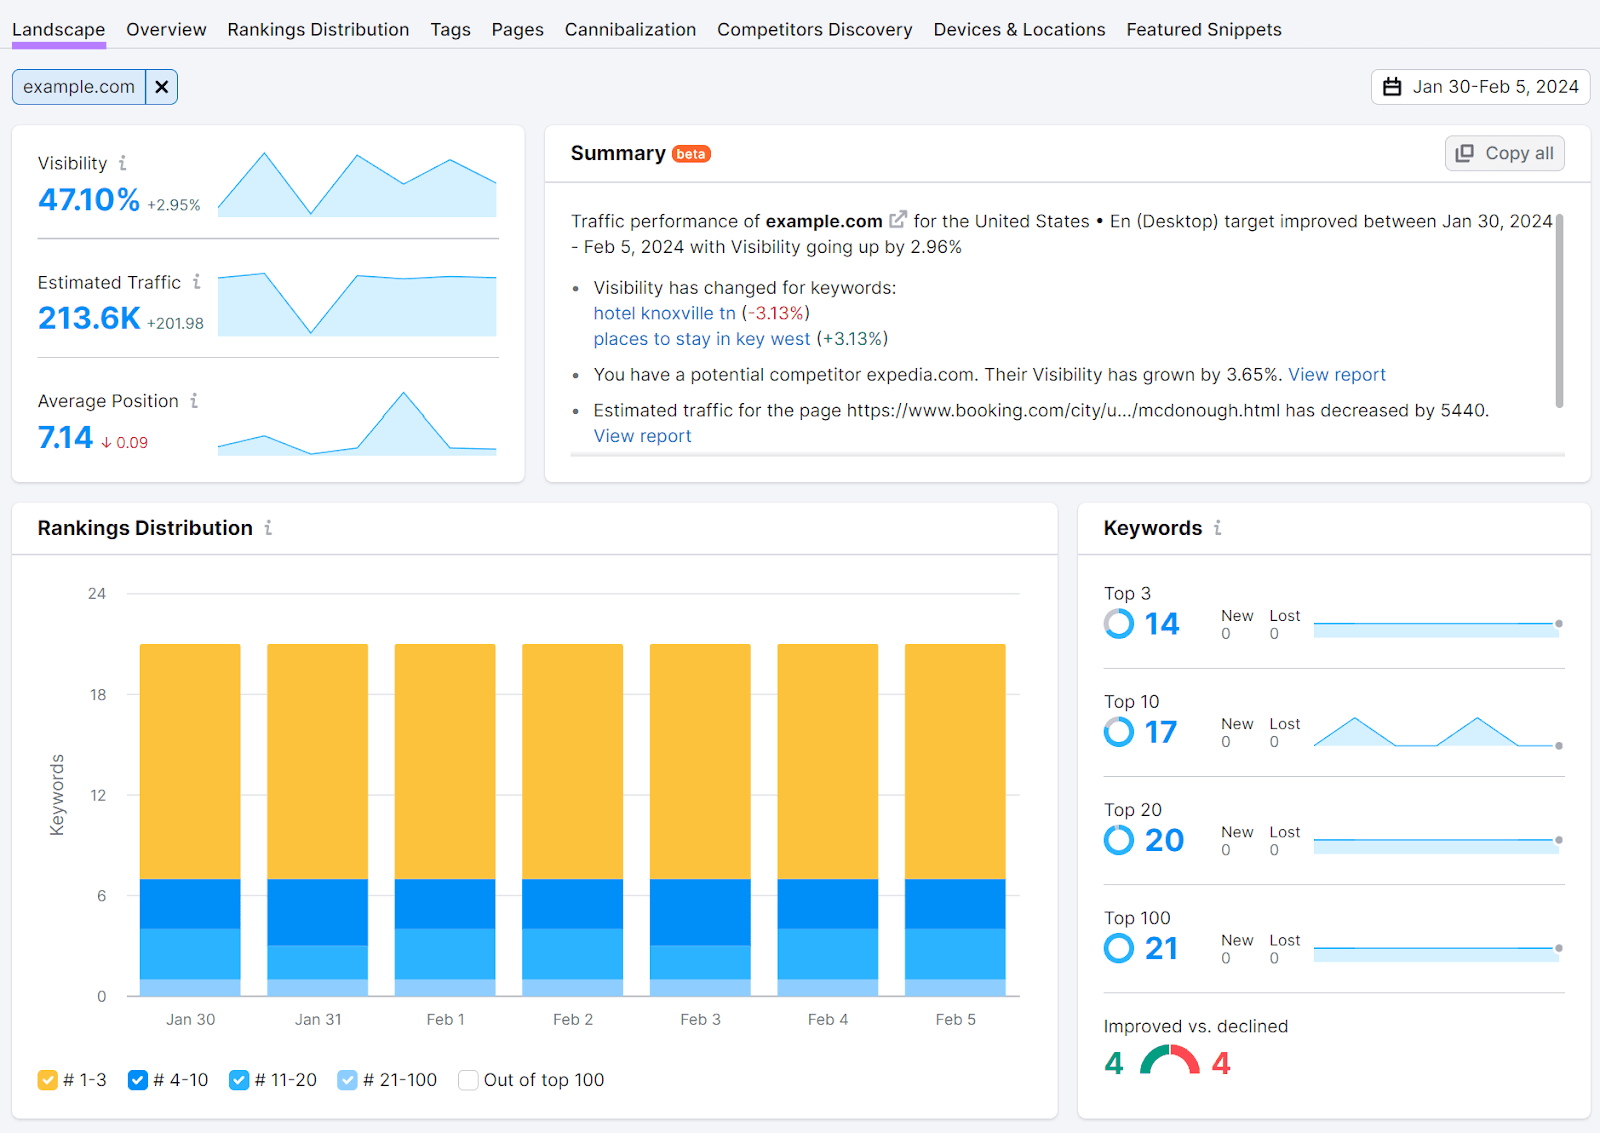 The "Landscape" report in Position Tracking tool